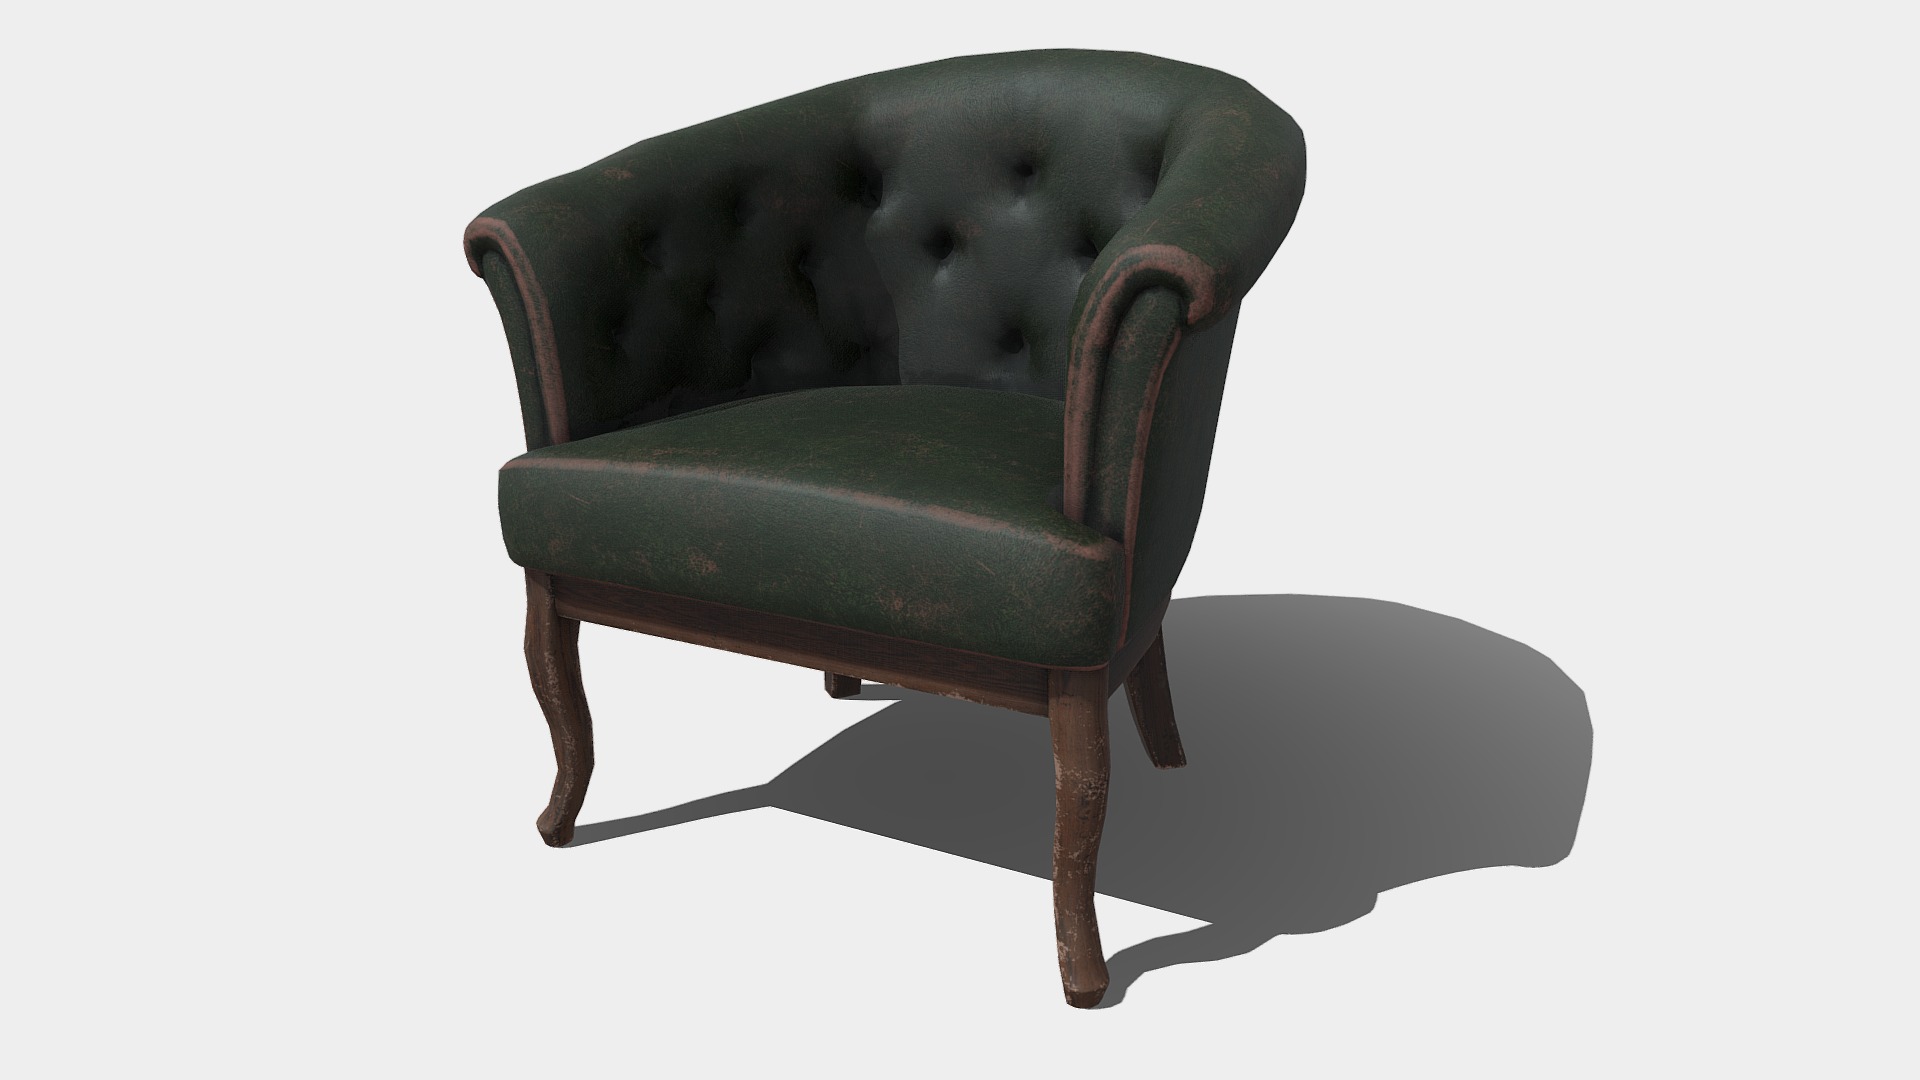 3D model Grand Chair - This is a 3D model of the Grand Chair. The 3D model is about a green chair with a cushion.